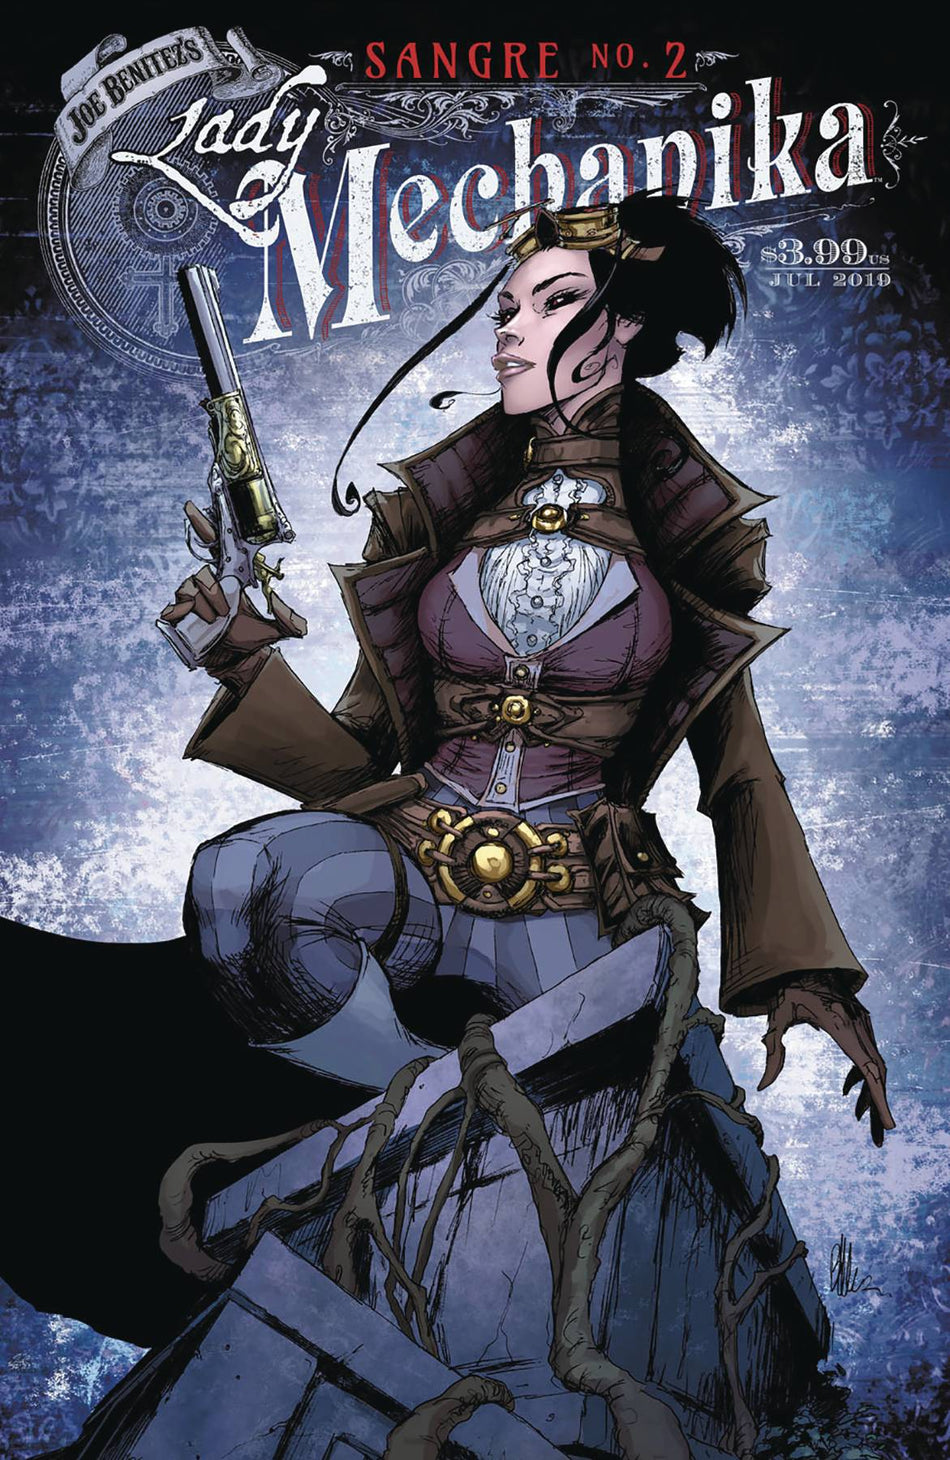 Photo of Lady Mechanika Sangre Issue 2 (of 5) Main Var CVRs - NM comic sold by Stronghold Collectibles